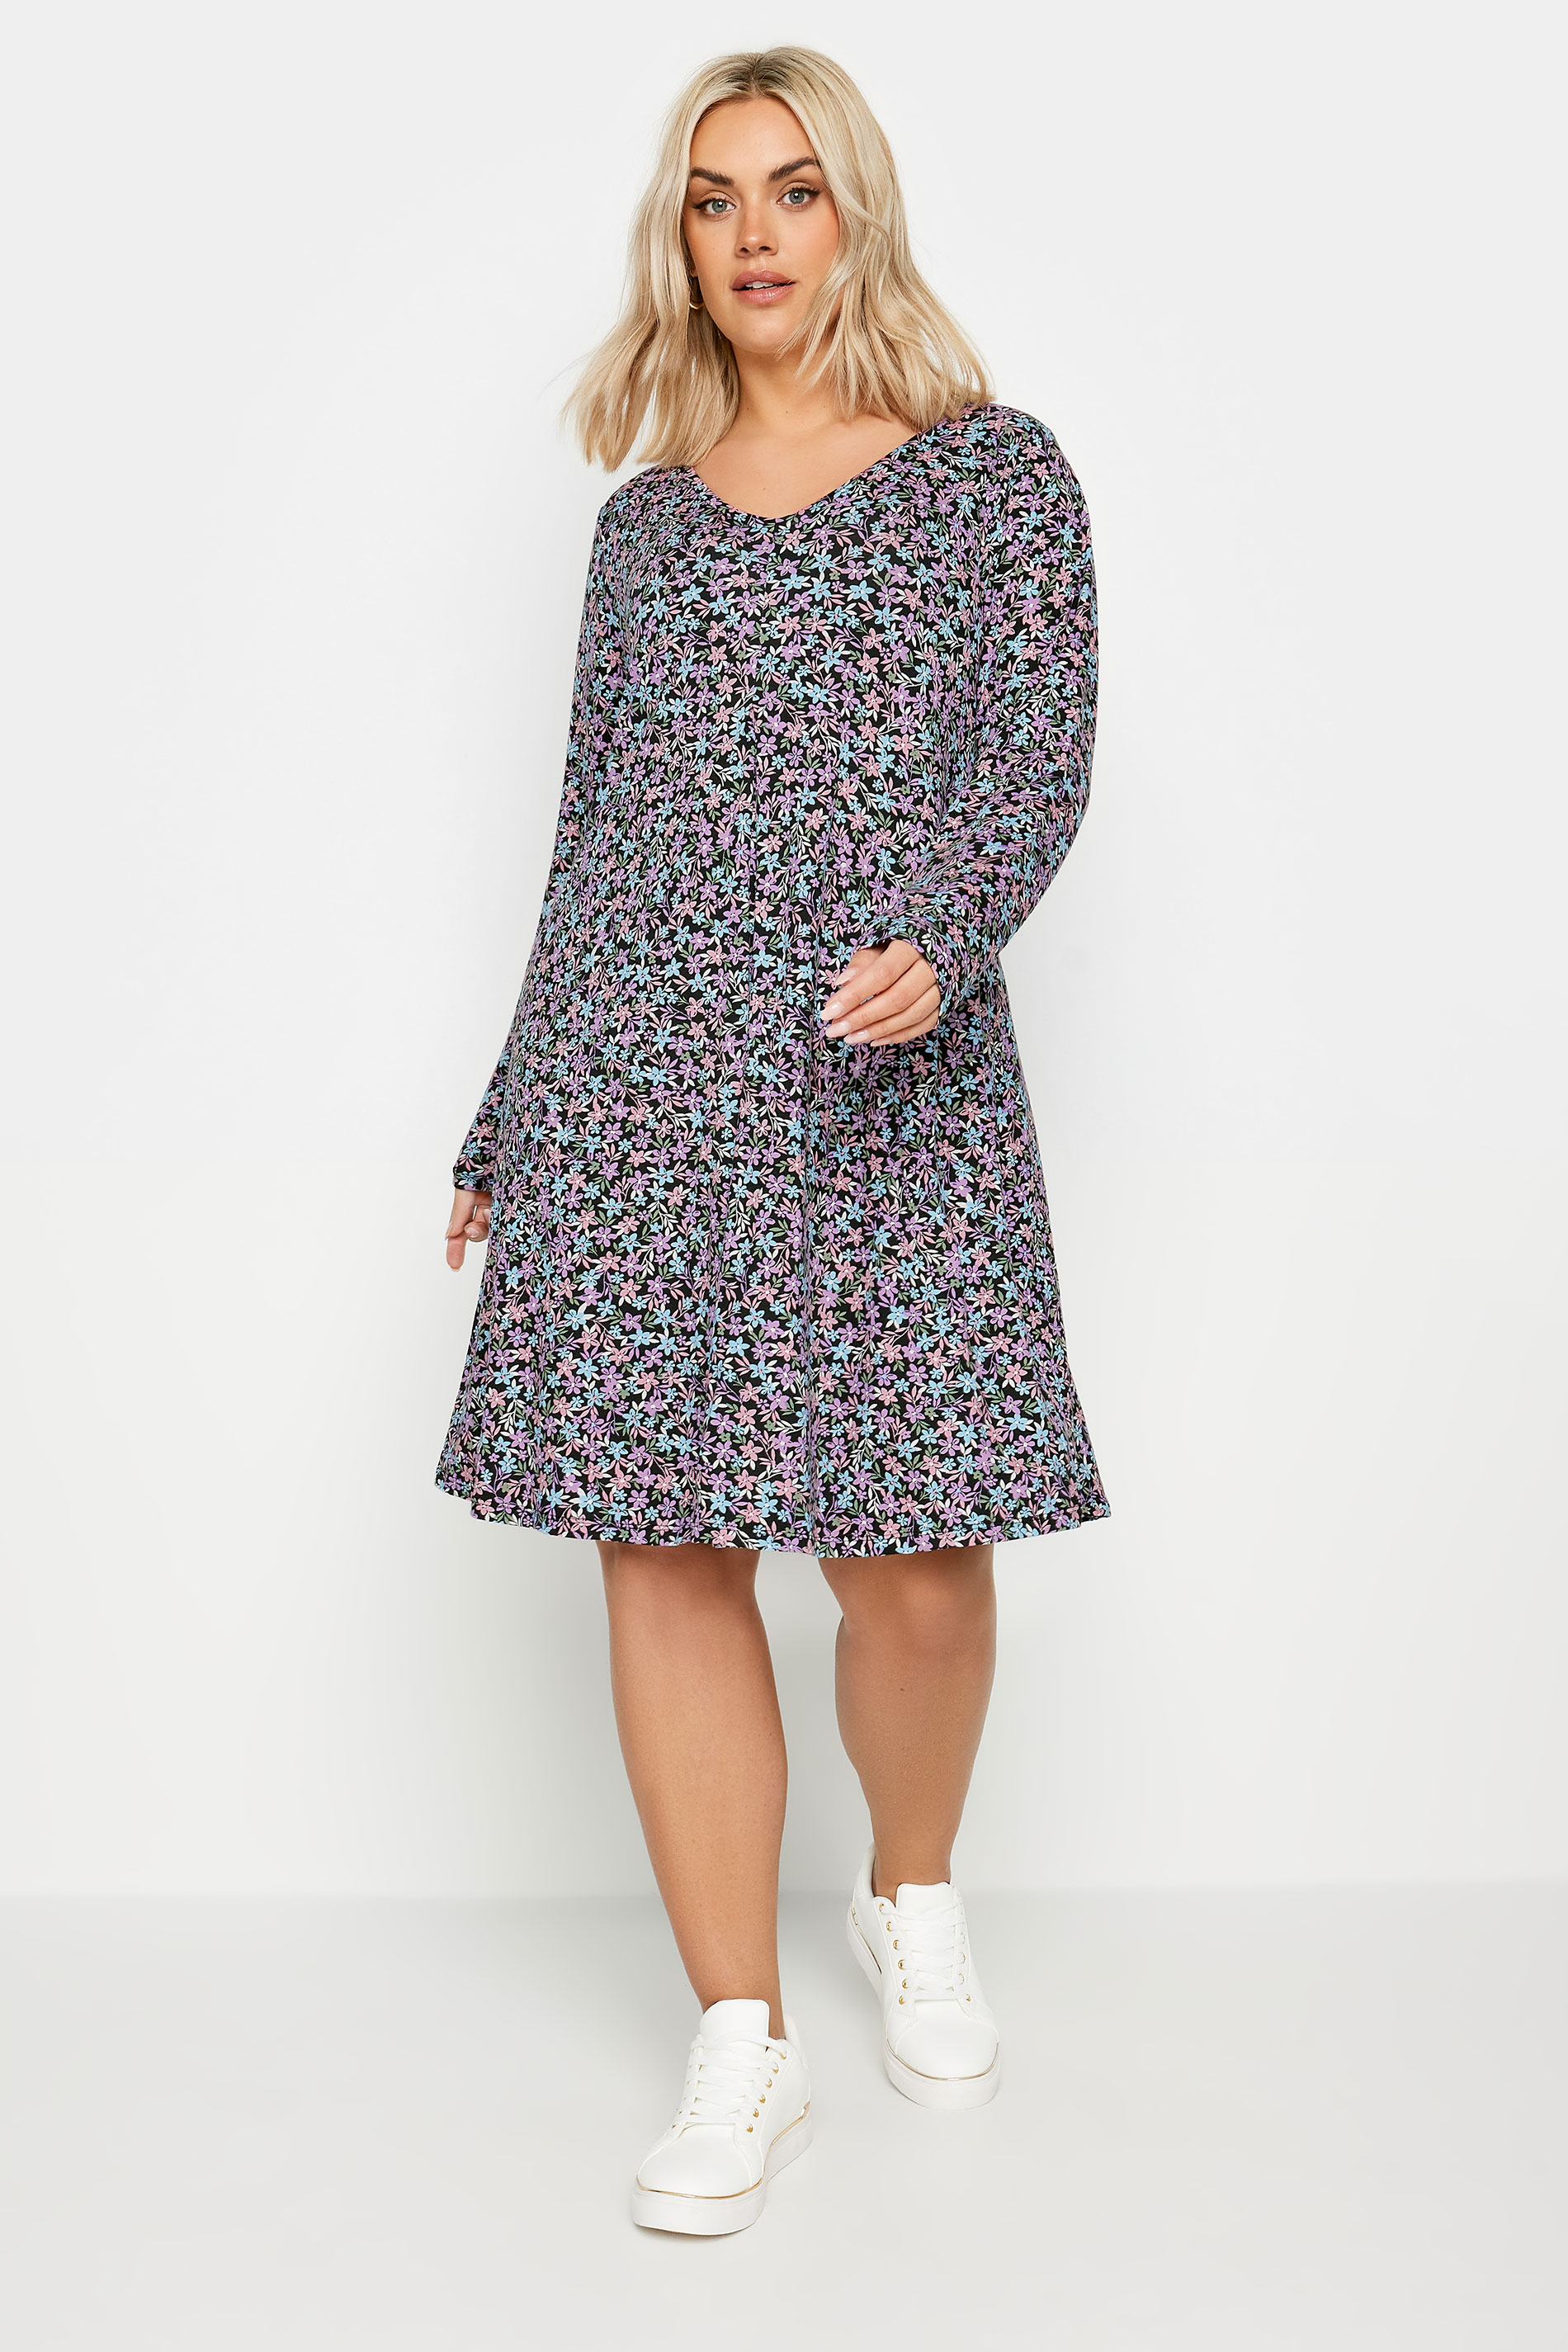 YOURS Plus Size Black Ditsy Floral Print Dress | Yours Clothing 1